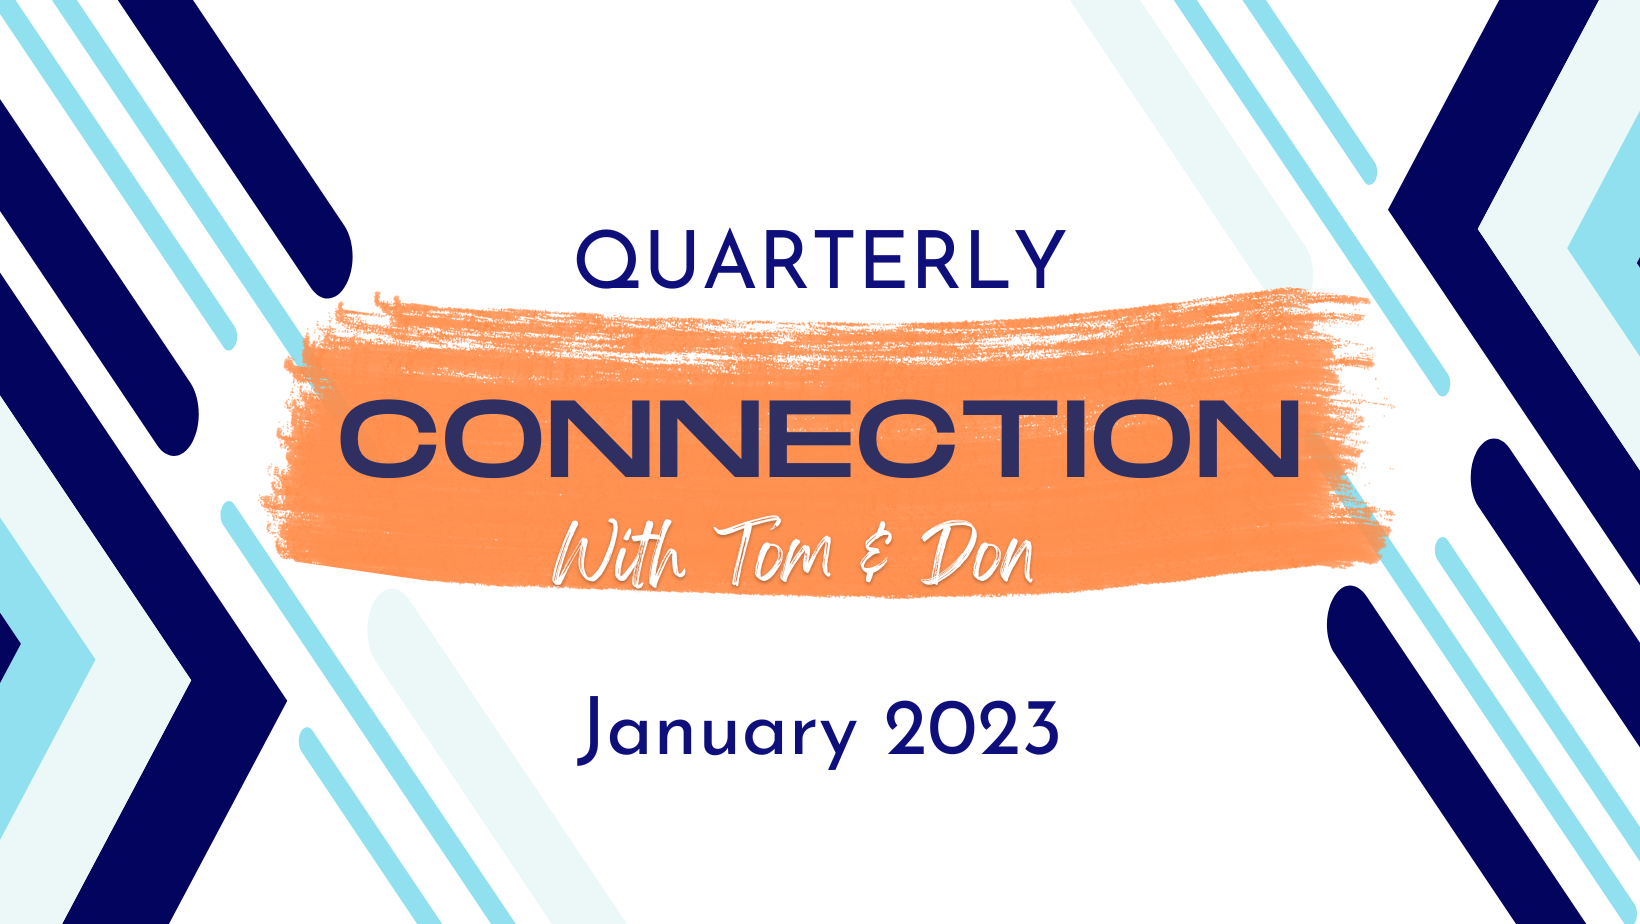 Quarterly Connection